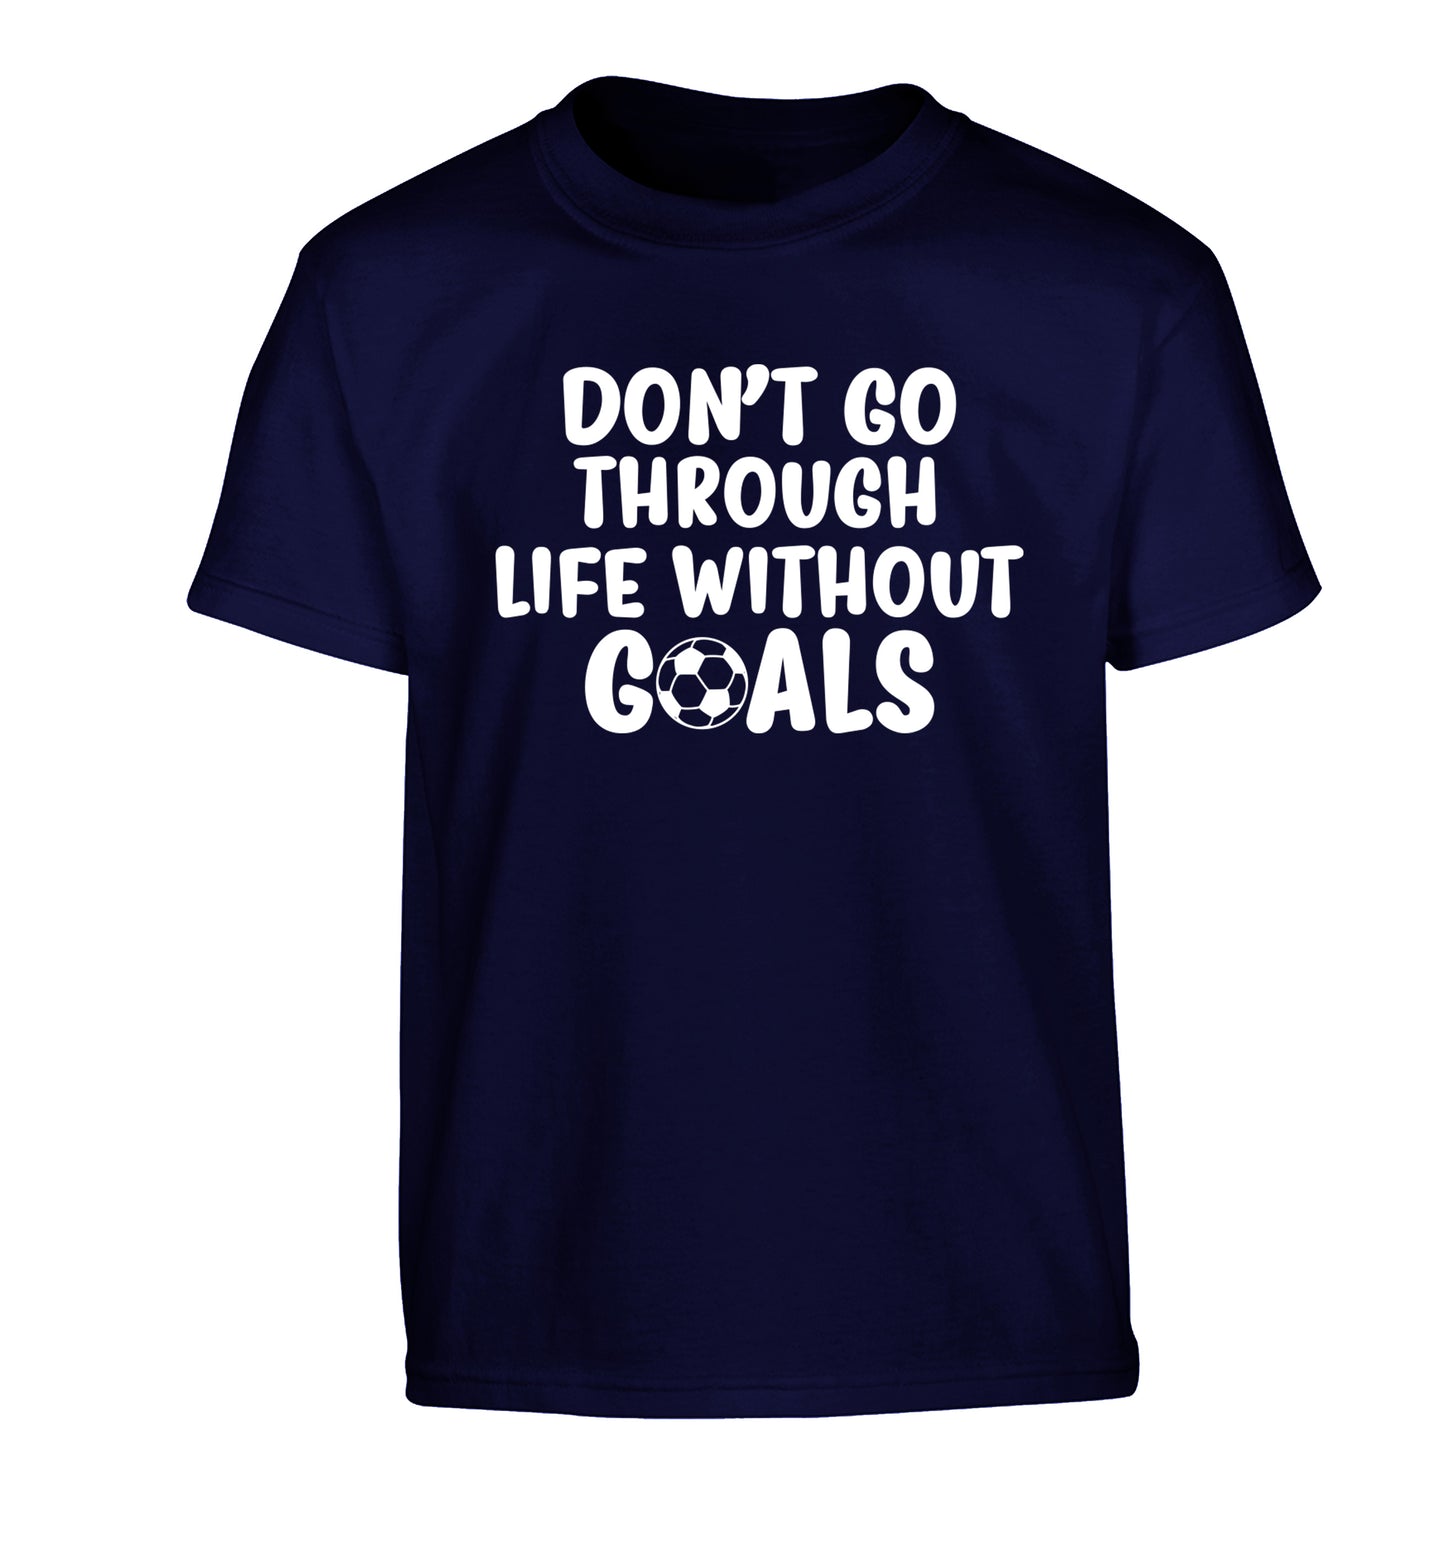 Don't go through life without goals Children's navy Tshirt 12-14 Years